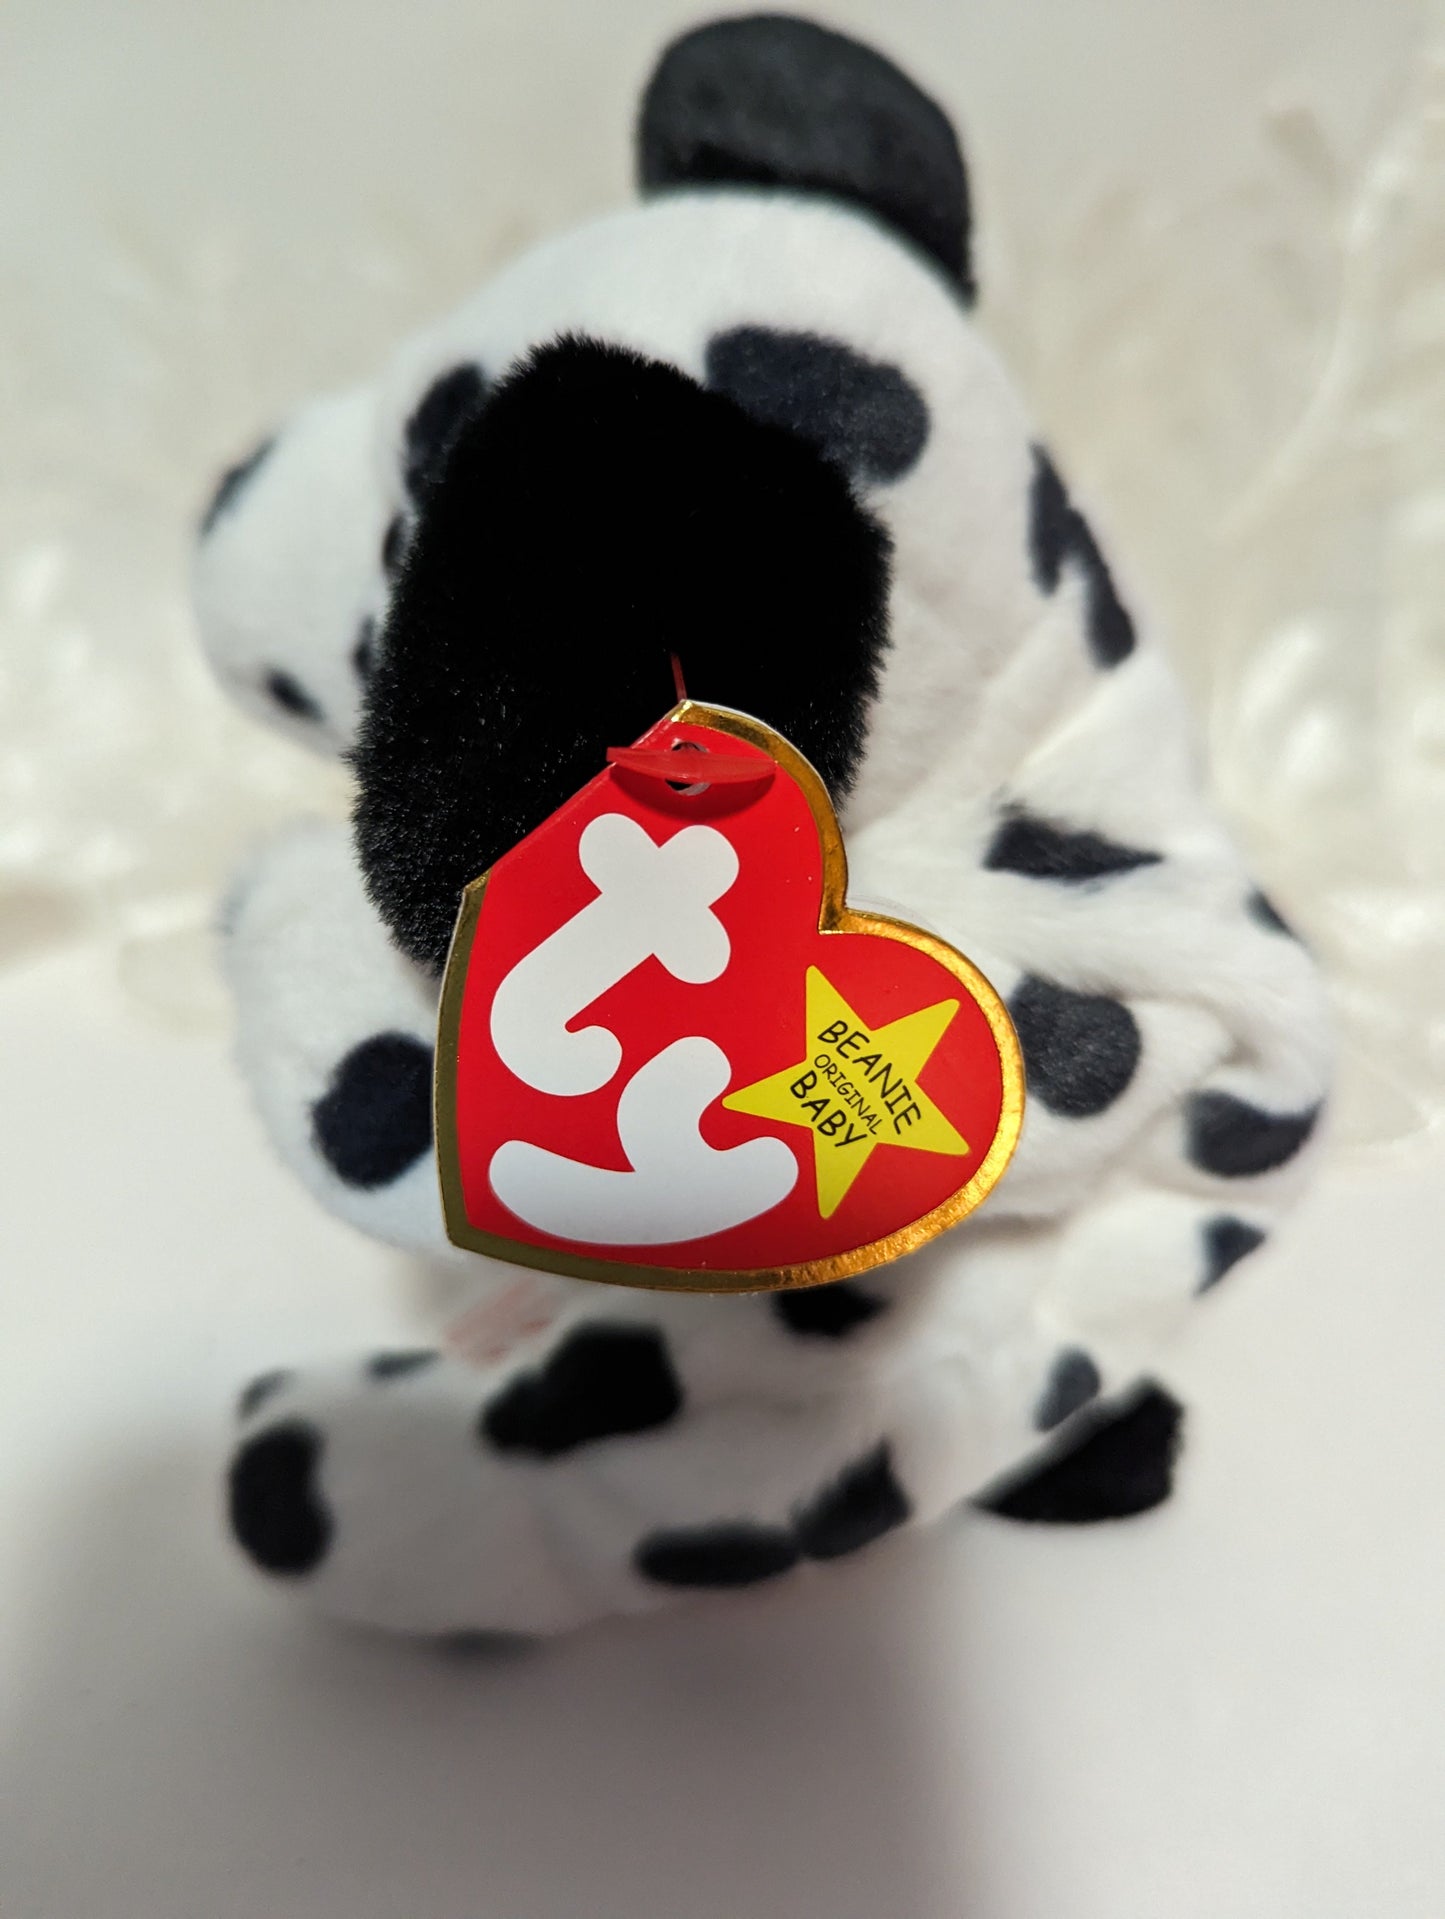 Ty Beanie Baby - Dotty II The Dalmatian (8in) 30th Anniversary - Vintage Beanies Canada